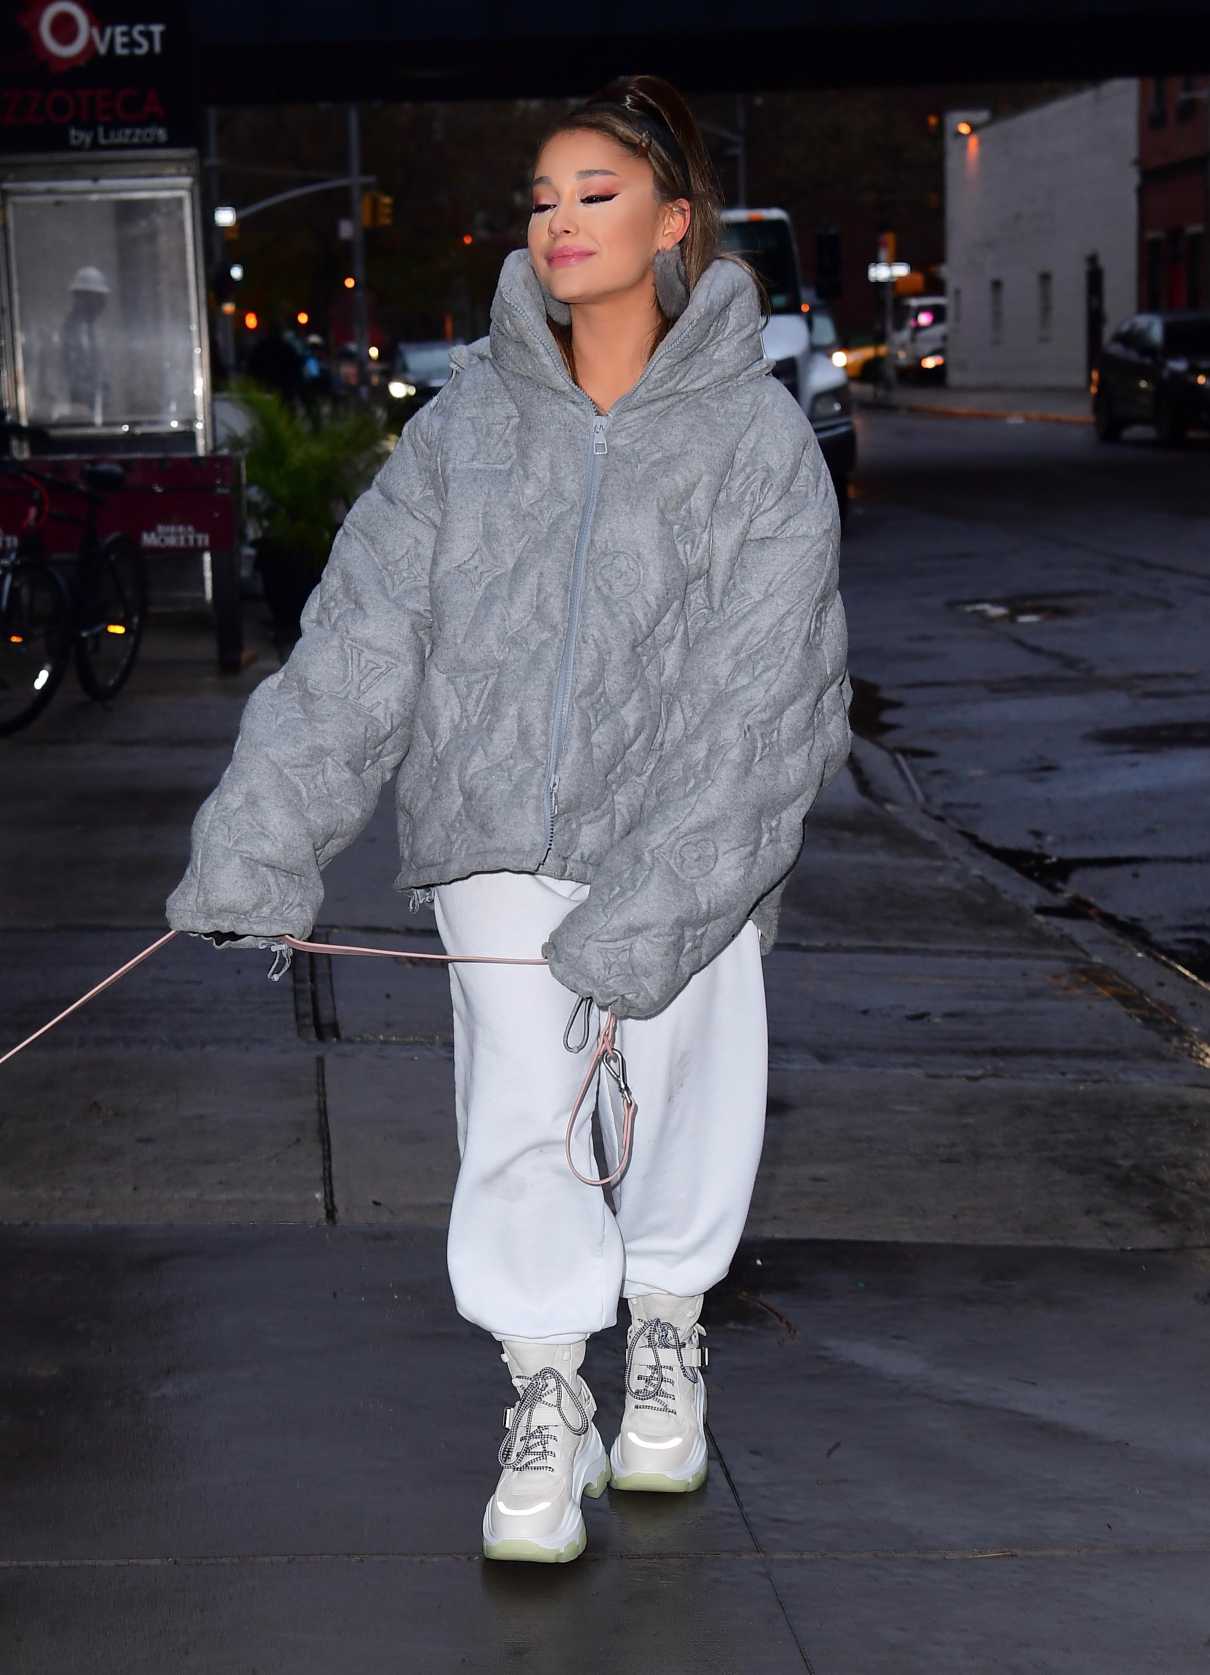 Ariana Grande in a Gray Jacket Was Seen Out in NYC 11/18 ...